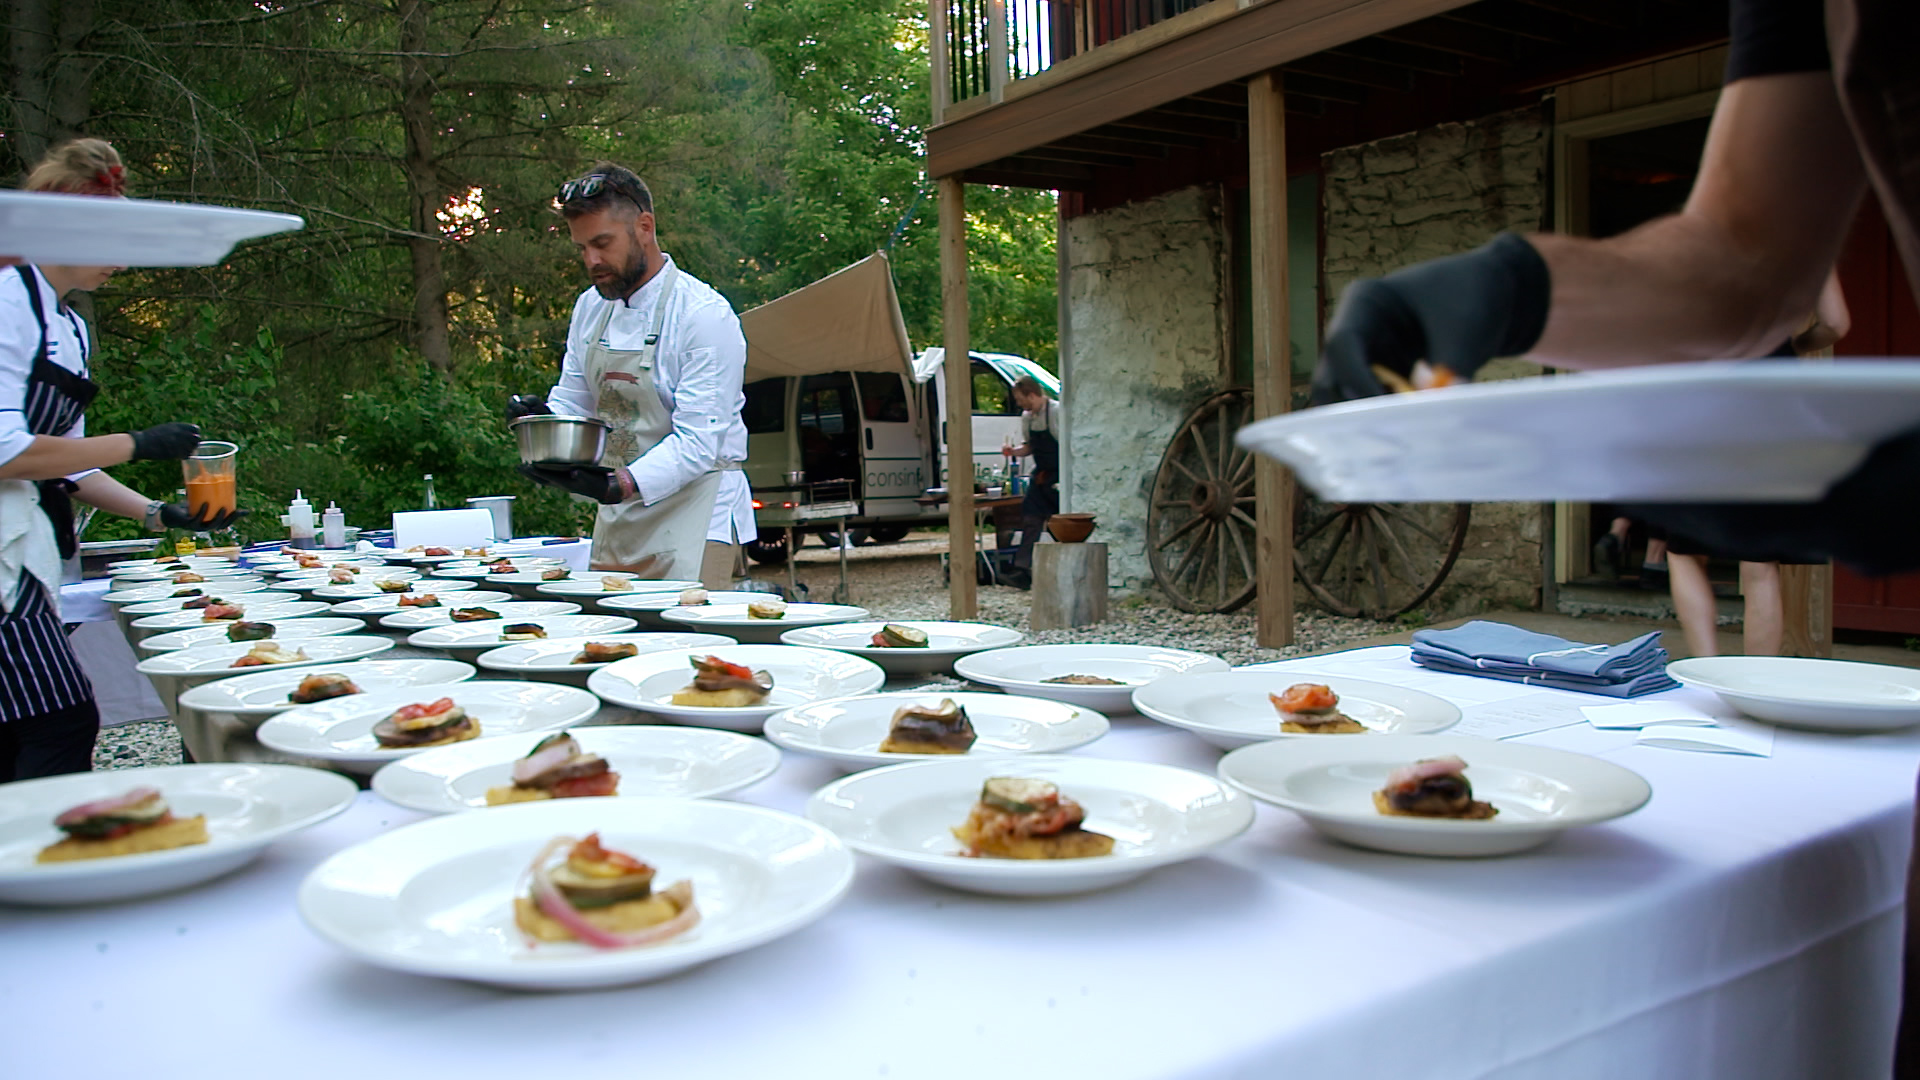 A chef adds food to white plates on a large table.